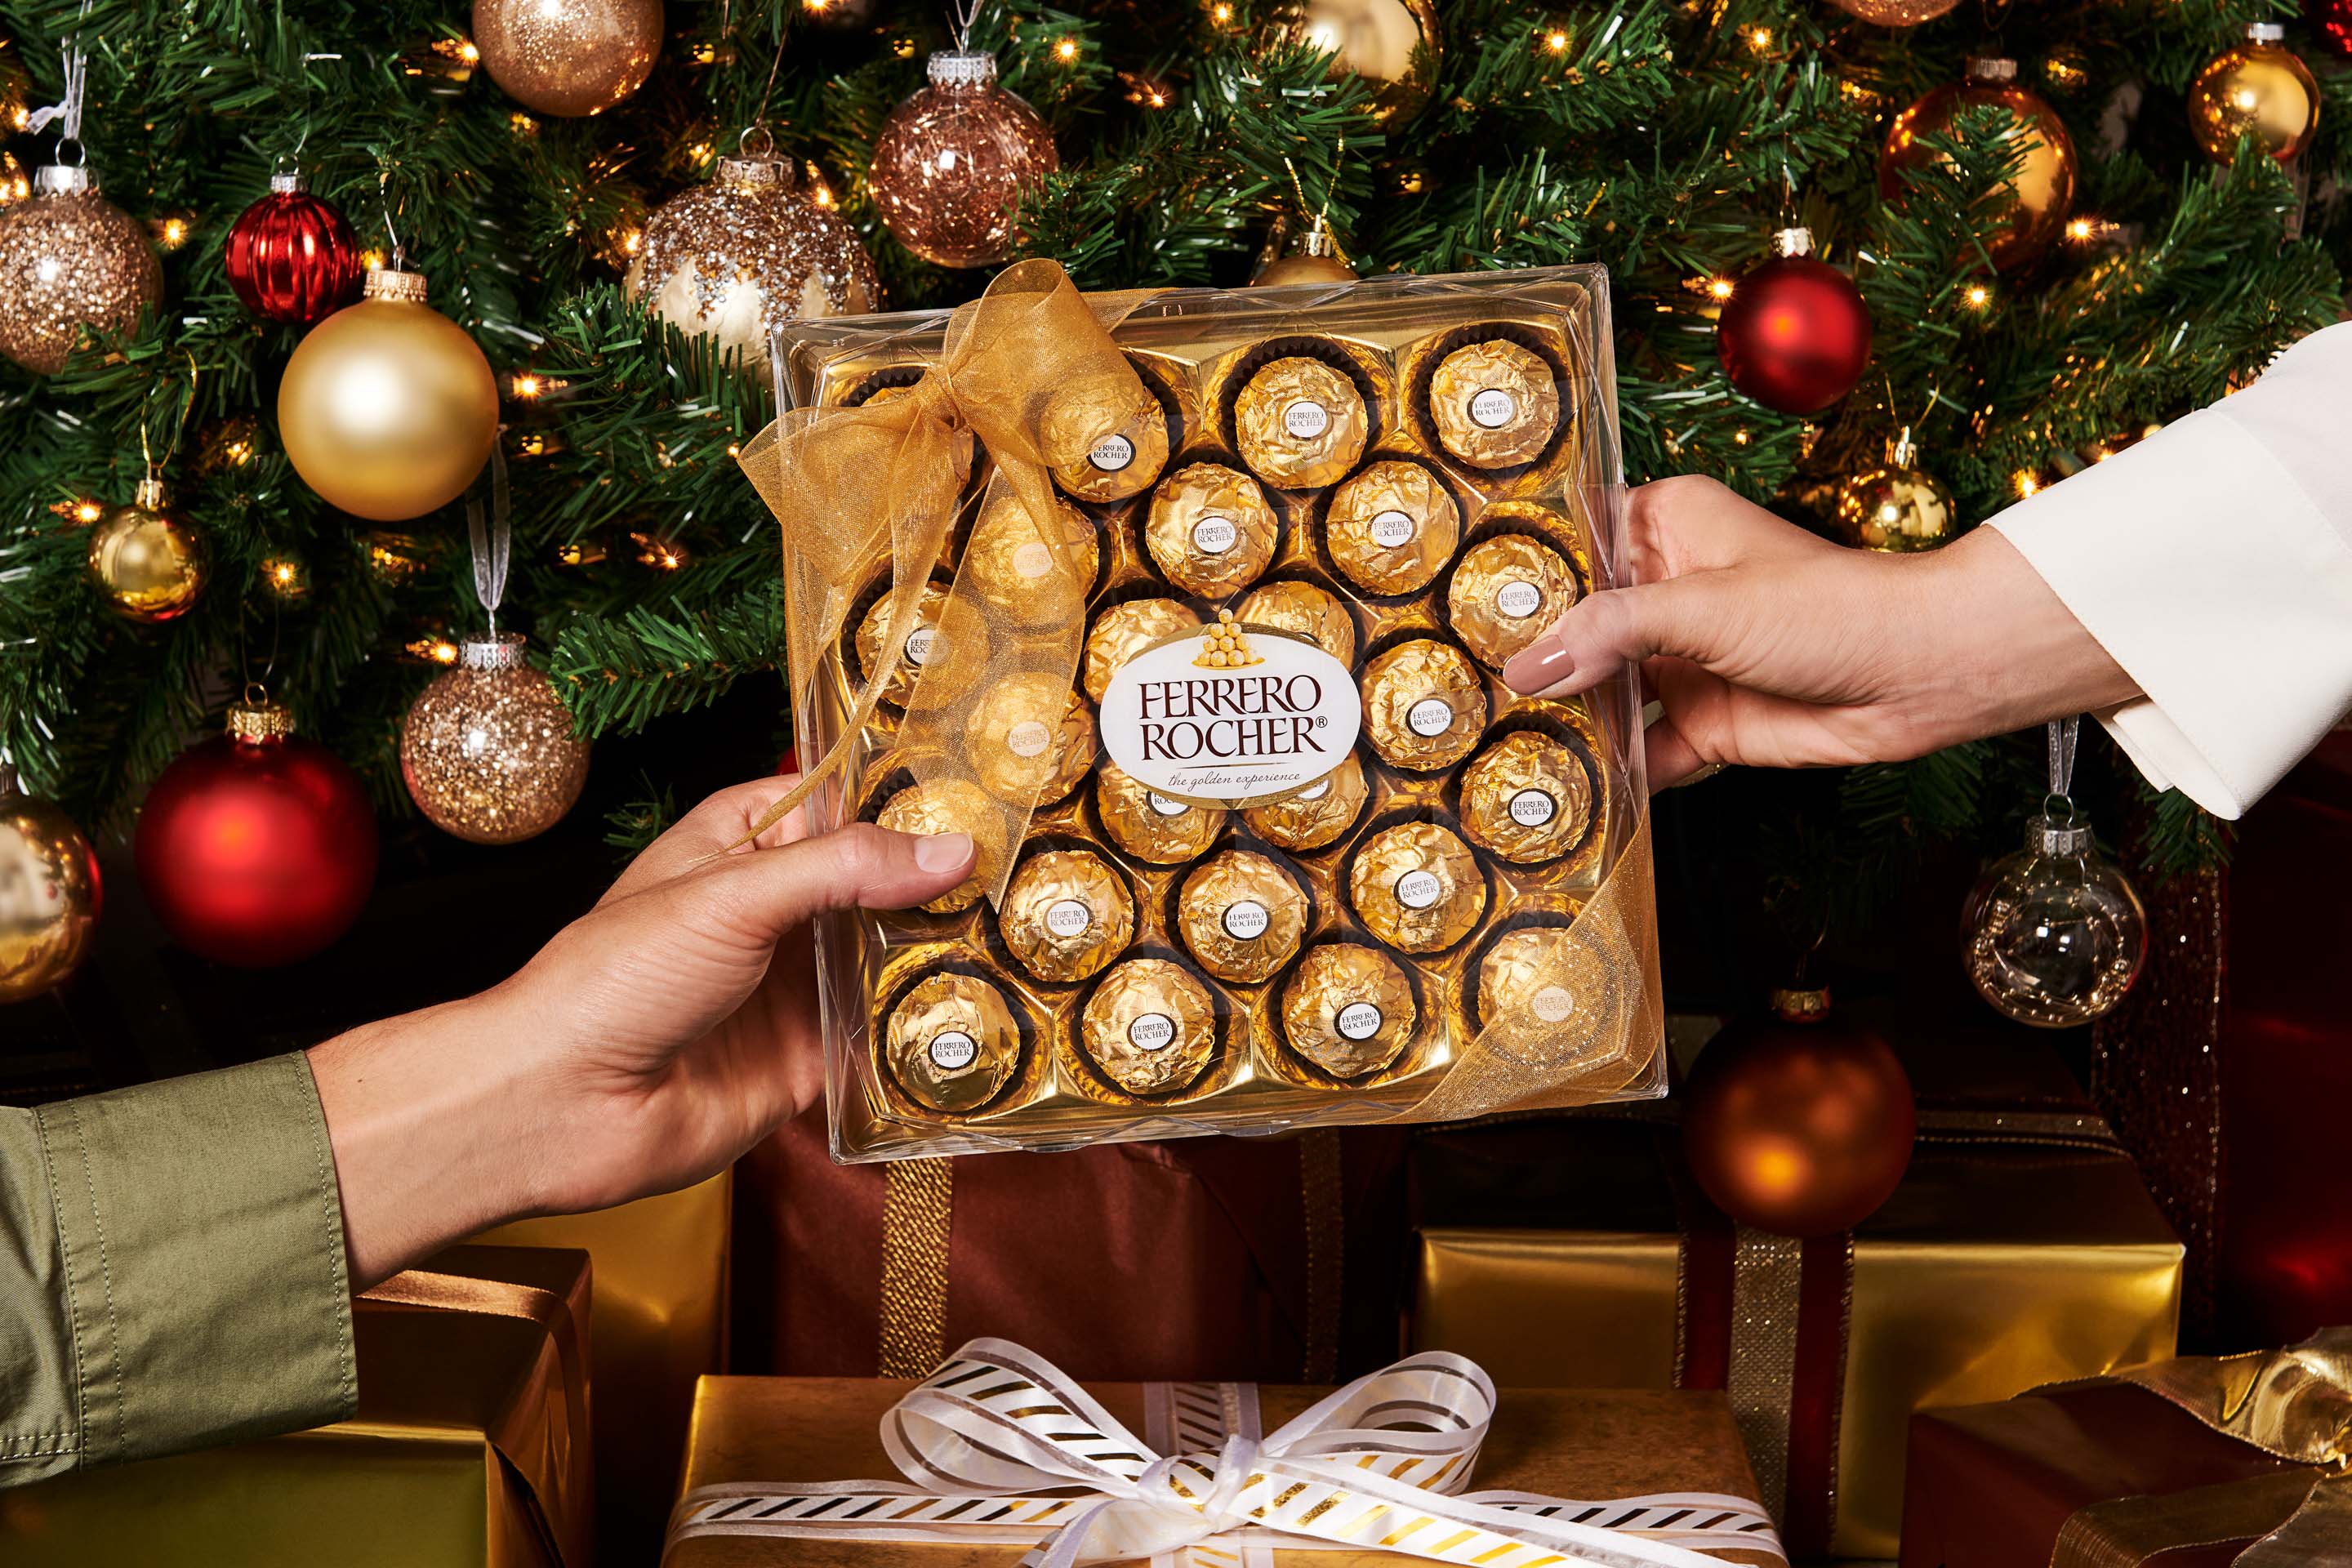 NYC + Chicago Food Photographer - Ferrero Roche Gifting at Christmas